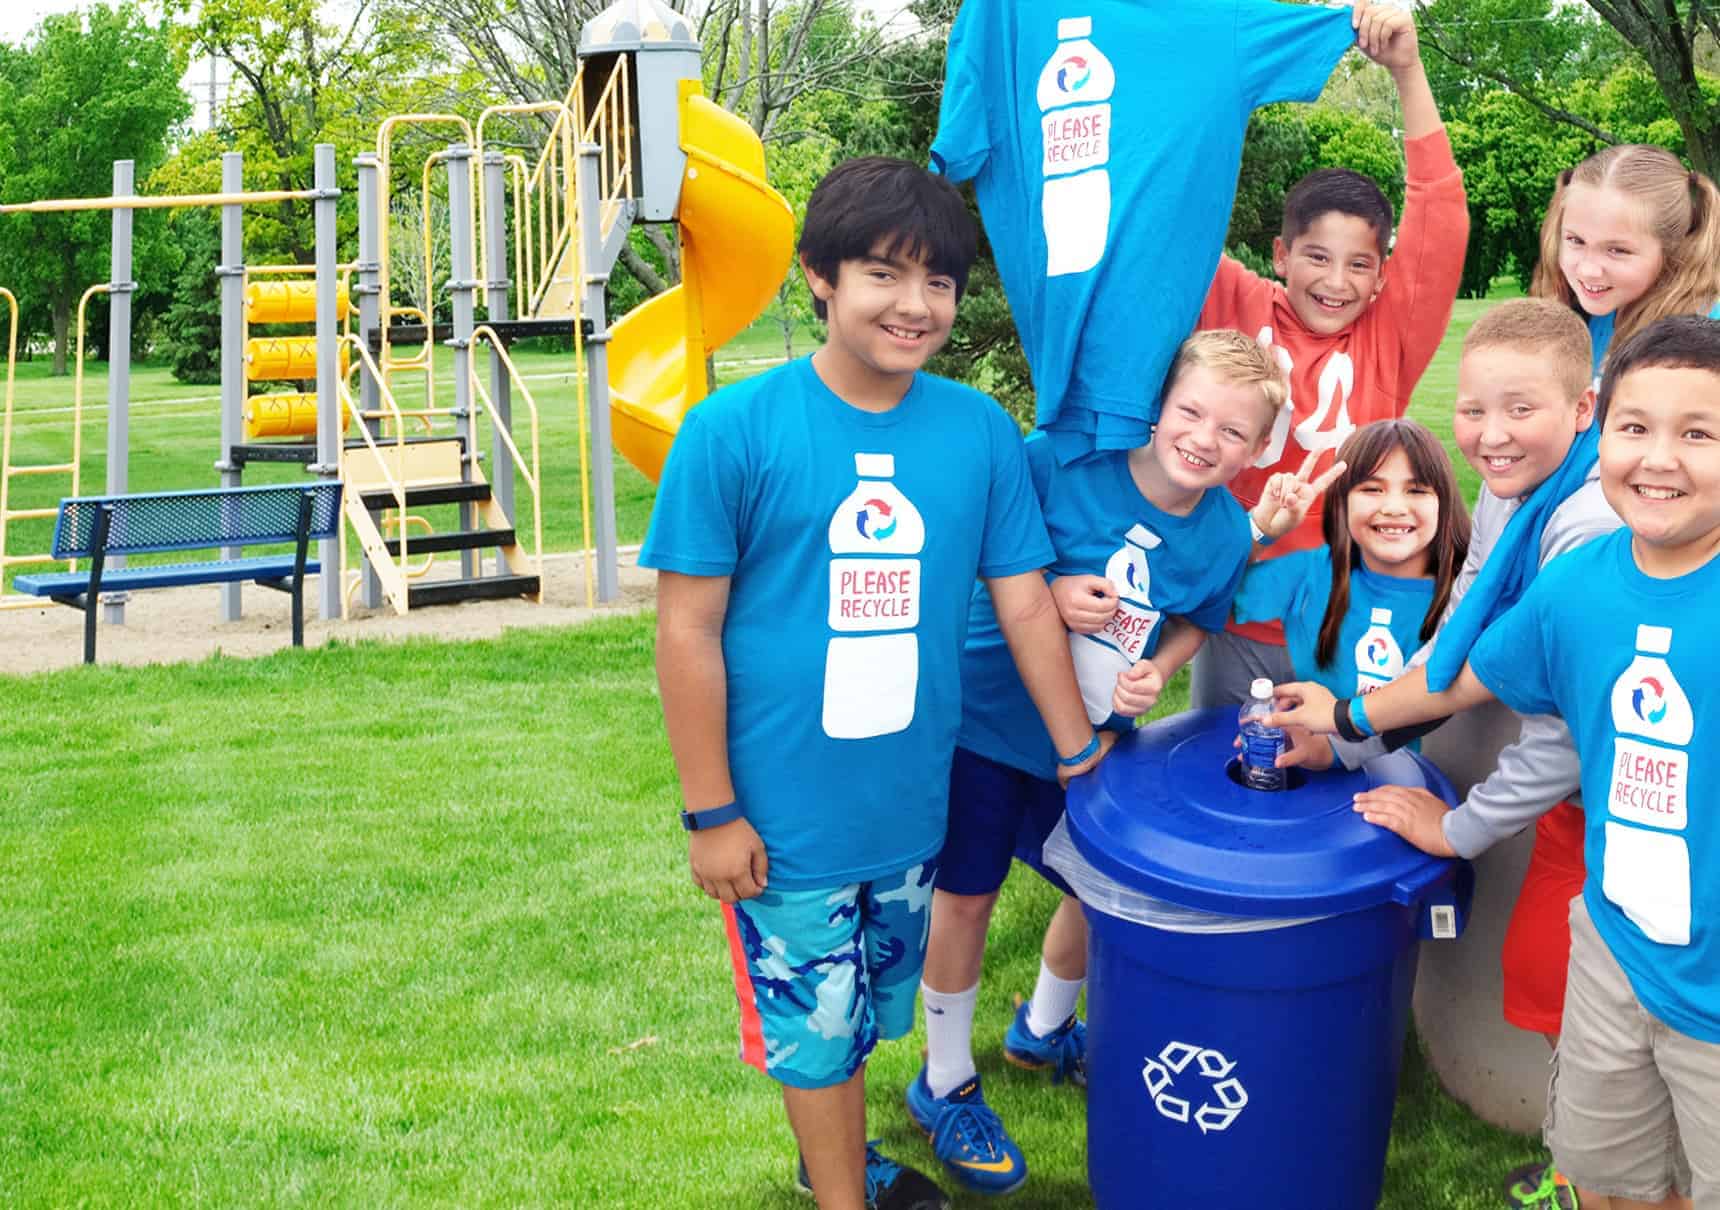 Children at a school hold up "Please Recycle" t-shirts at a PepsiCo Recycle Rally event.